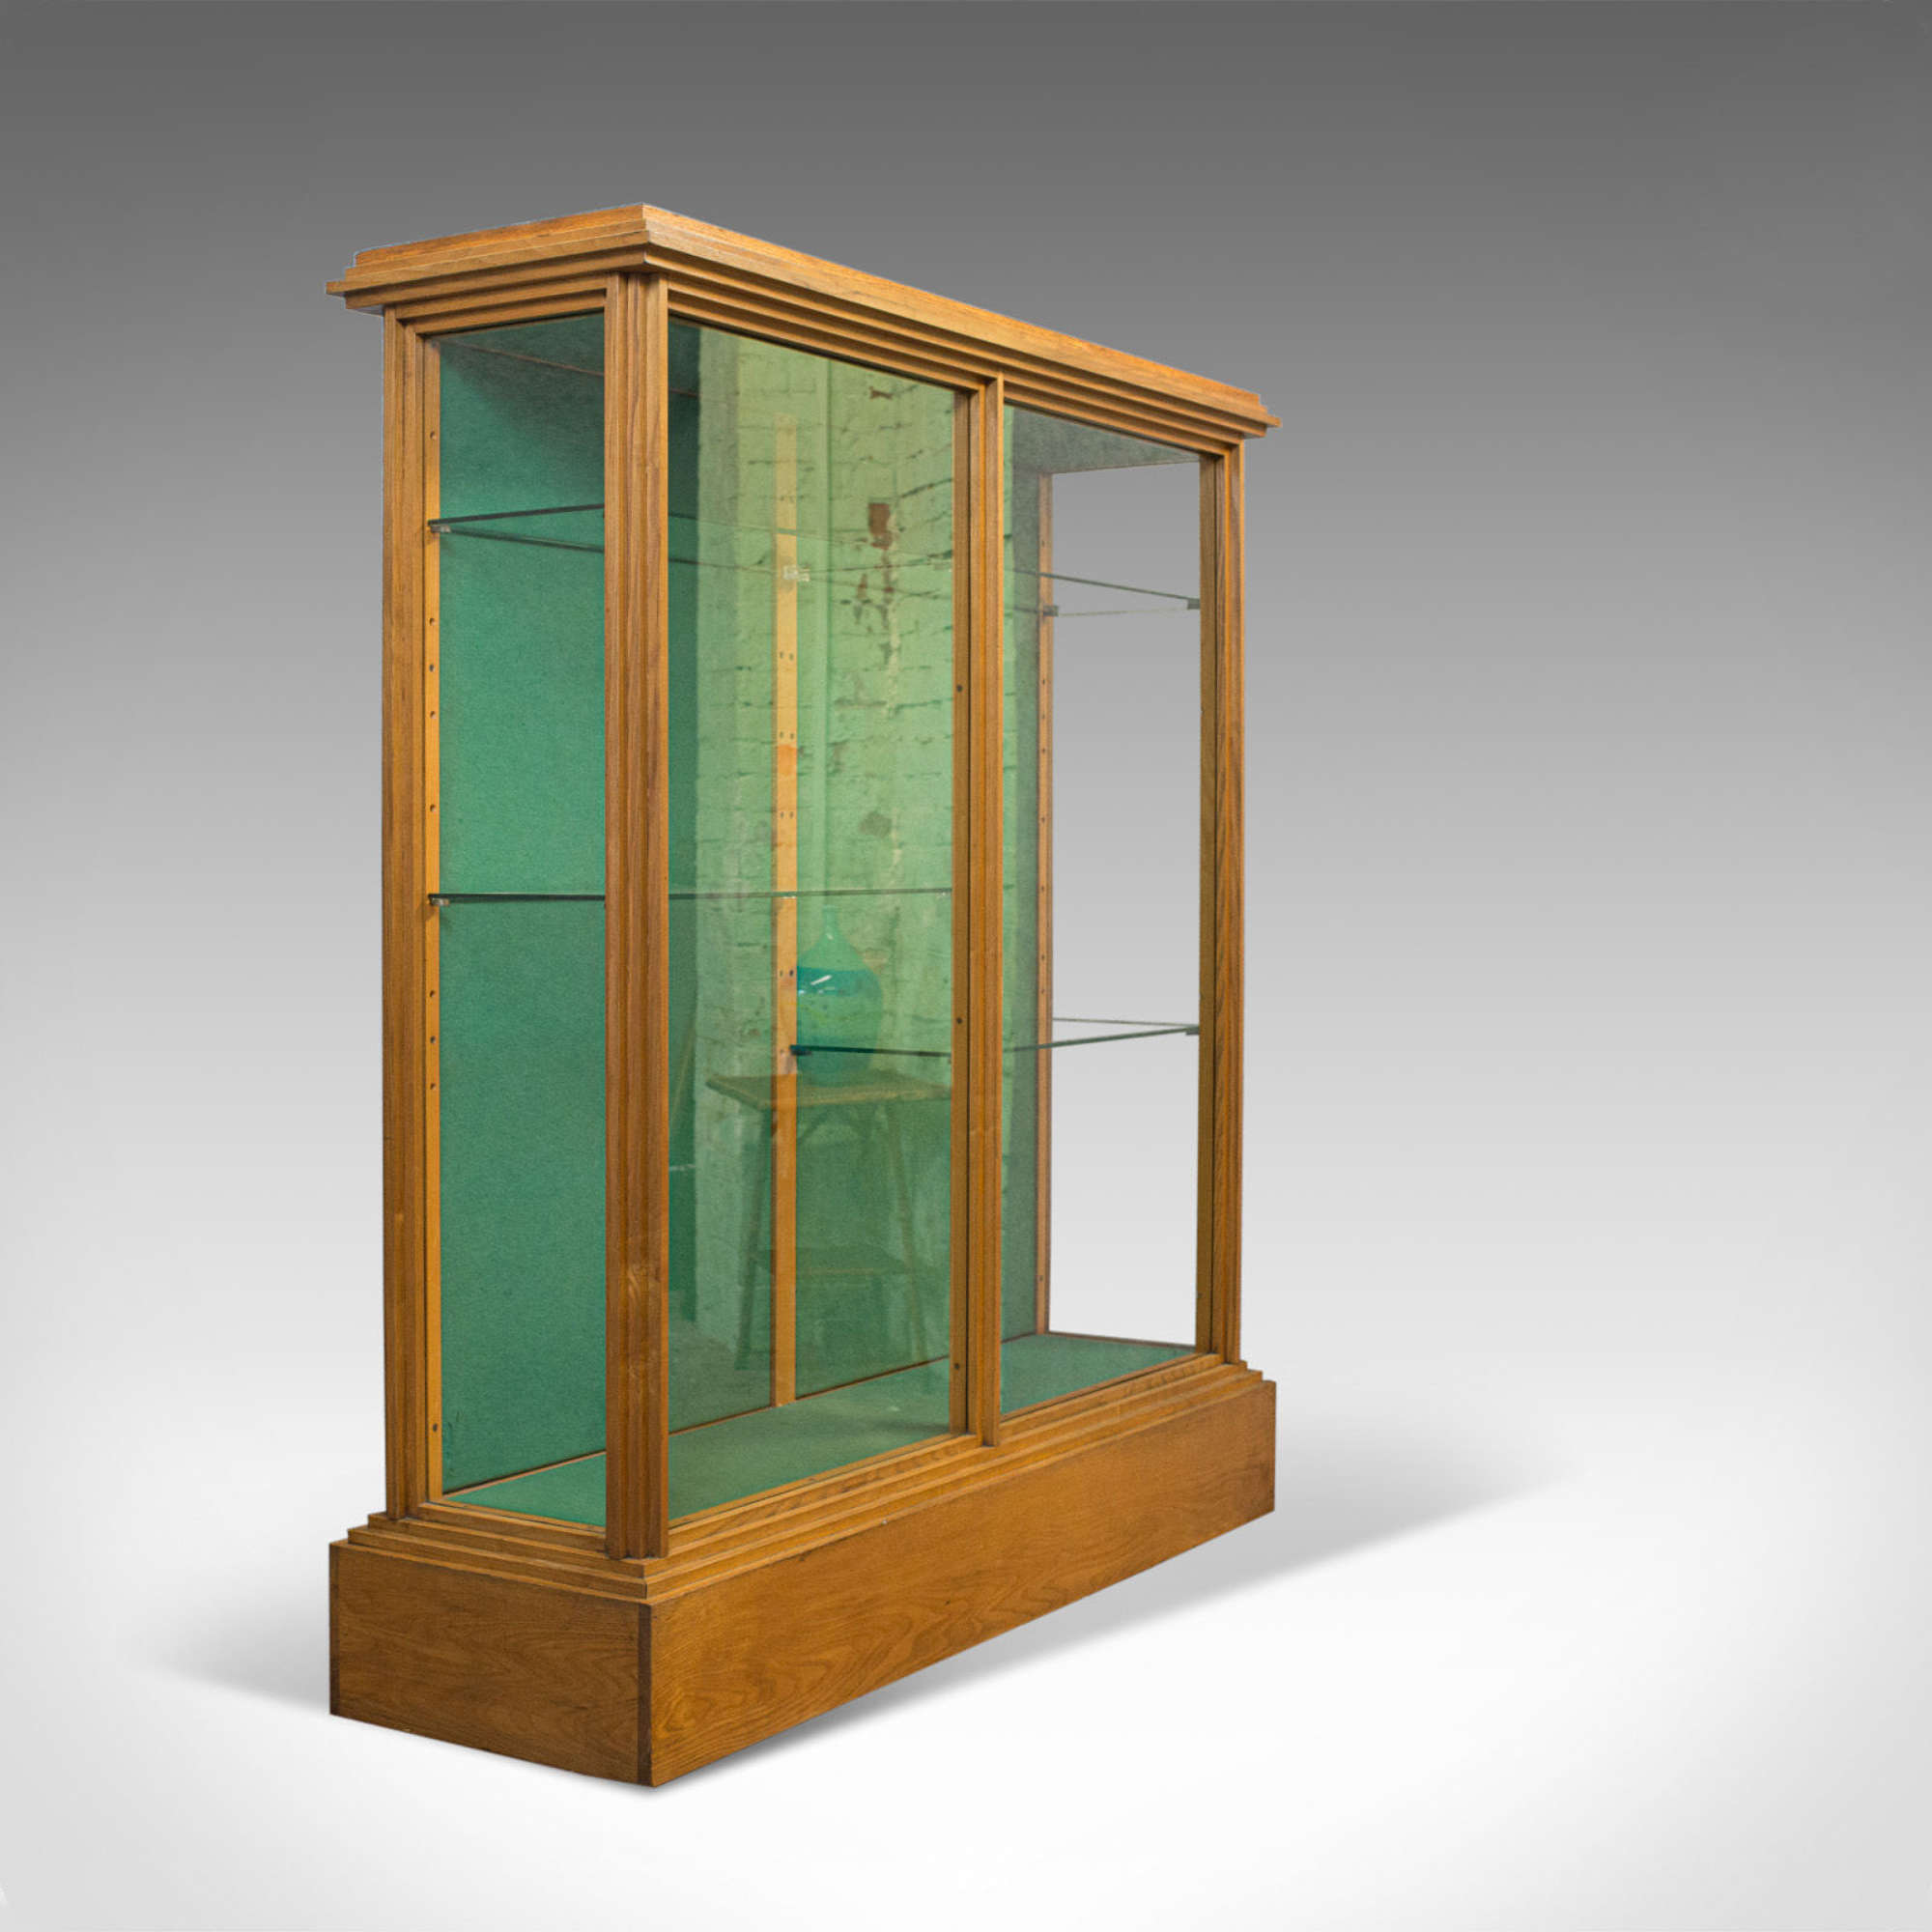 Antique Shop Display Cabinet, English, Victorian Fitting, Ash, Fitting C.1900